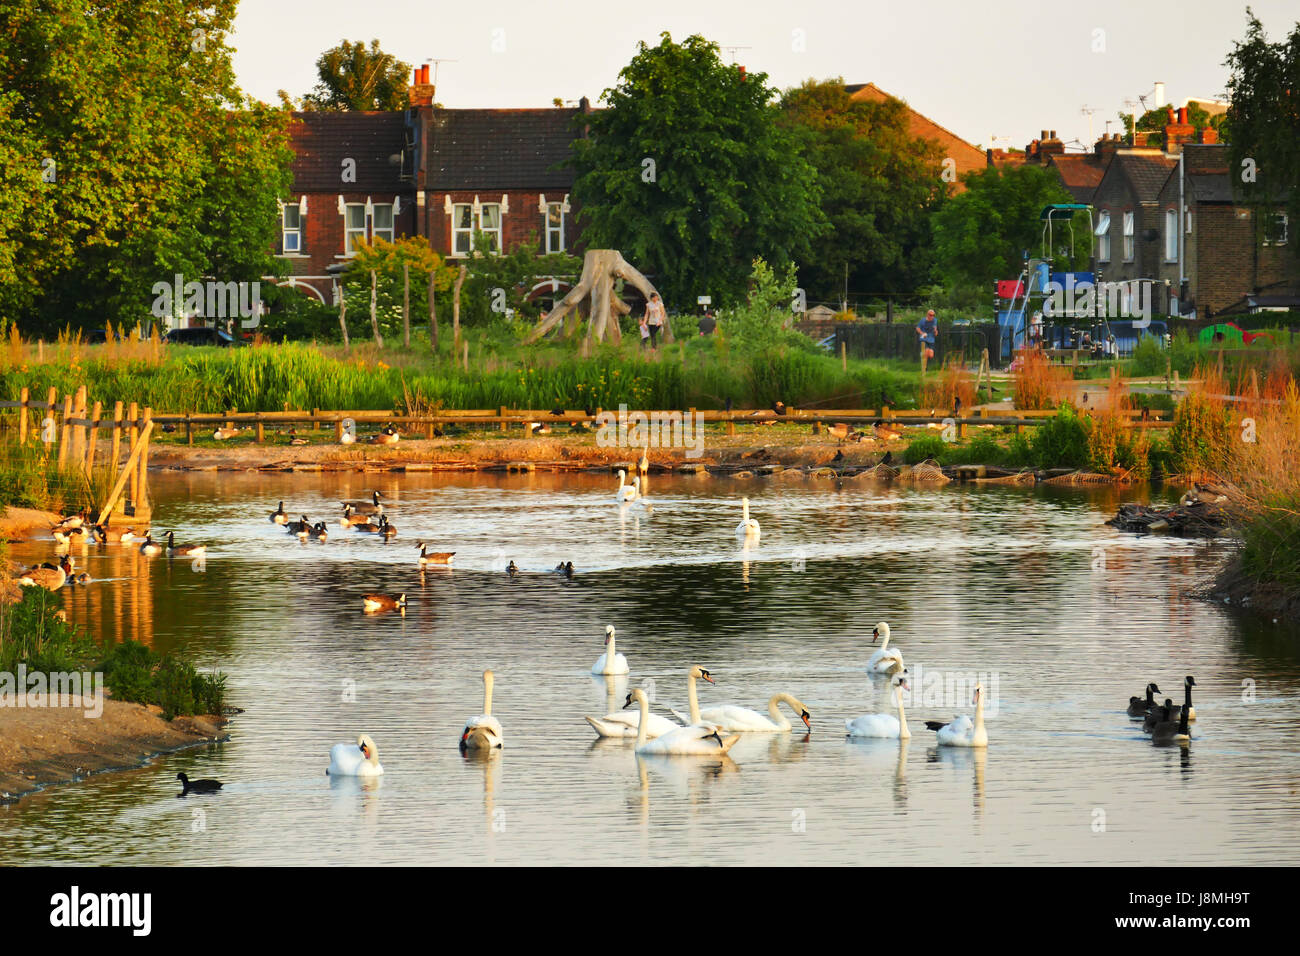 Swans, ducks and geese on Jubilee Pond. Wanstead Flats, London E7 with the houses of Sidney Road in the background. Stock Photo